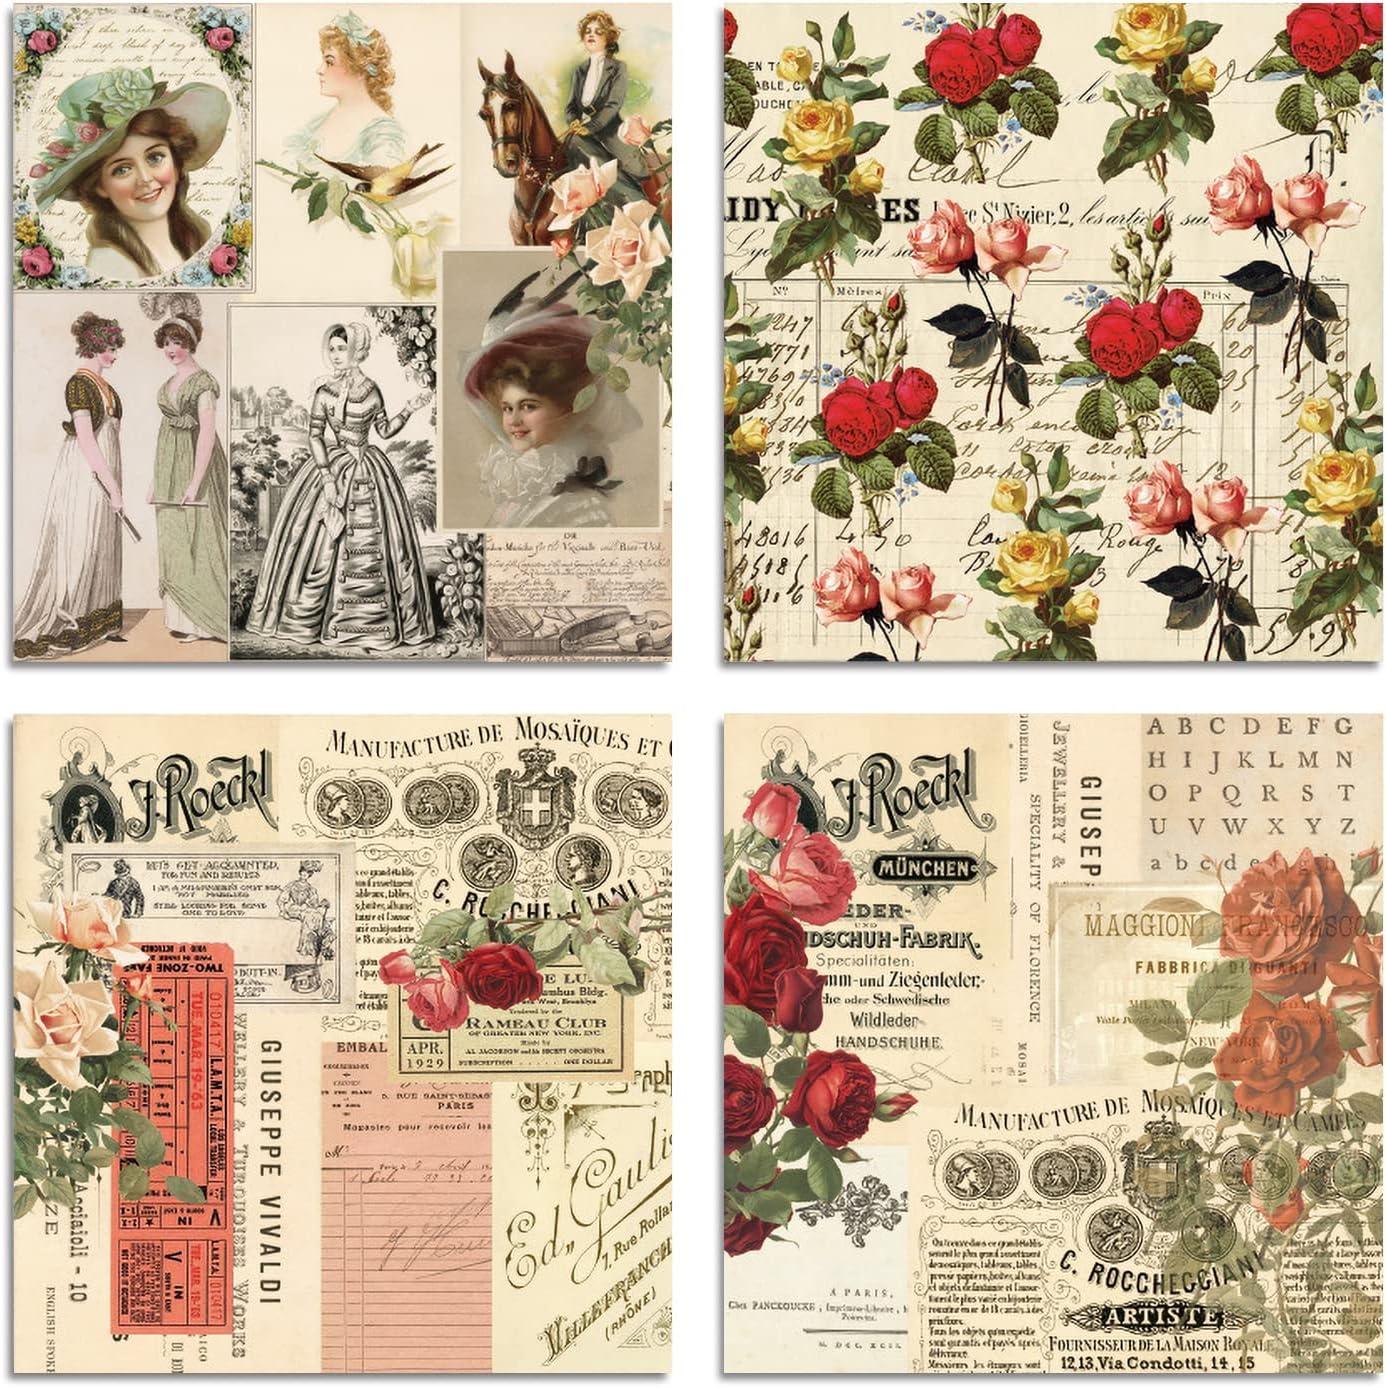 Aged Paper Patterned Scrapbooking Paper Pack Handmade Craft Background Pad  Single-side Printed